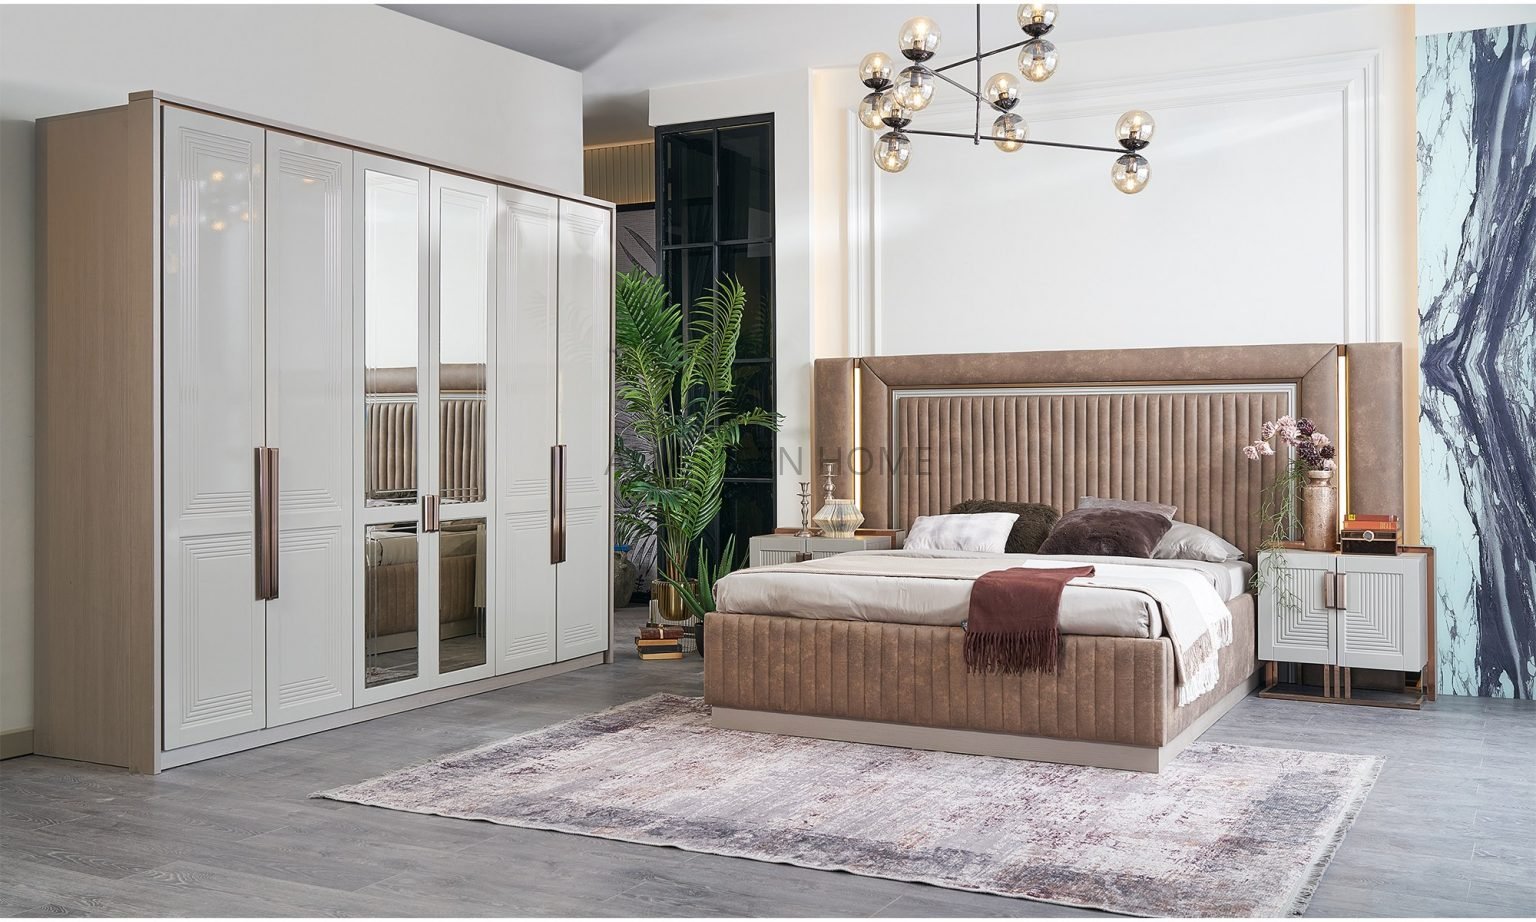 turkish-moon-bedroom-set-with-king-size-bed-dresser-wardrobe-and-side-tables-3- AL-Mateen Home